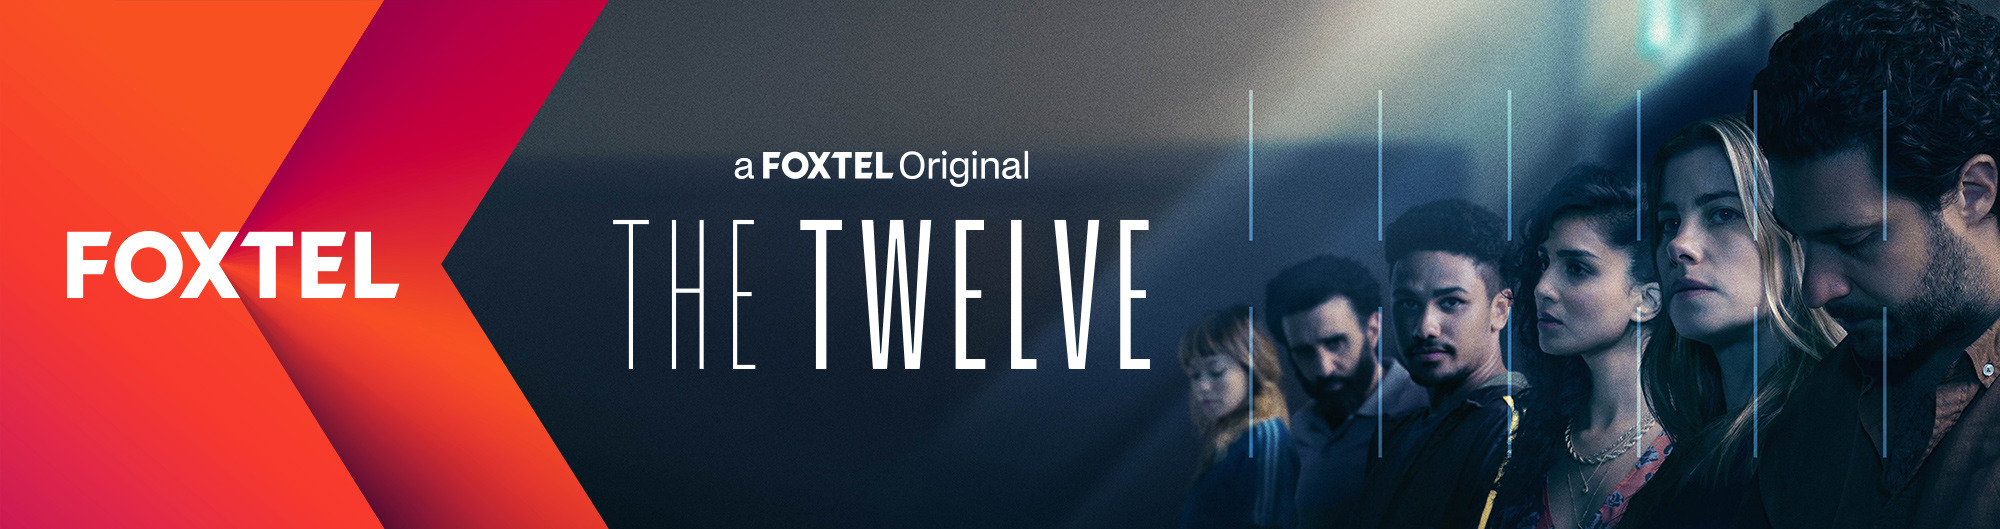 Mega Sized TV Poster Image for The Twelve (#8 of 8)